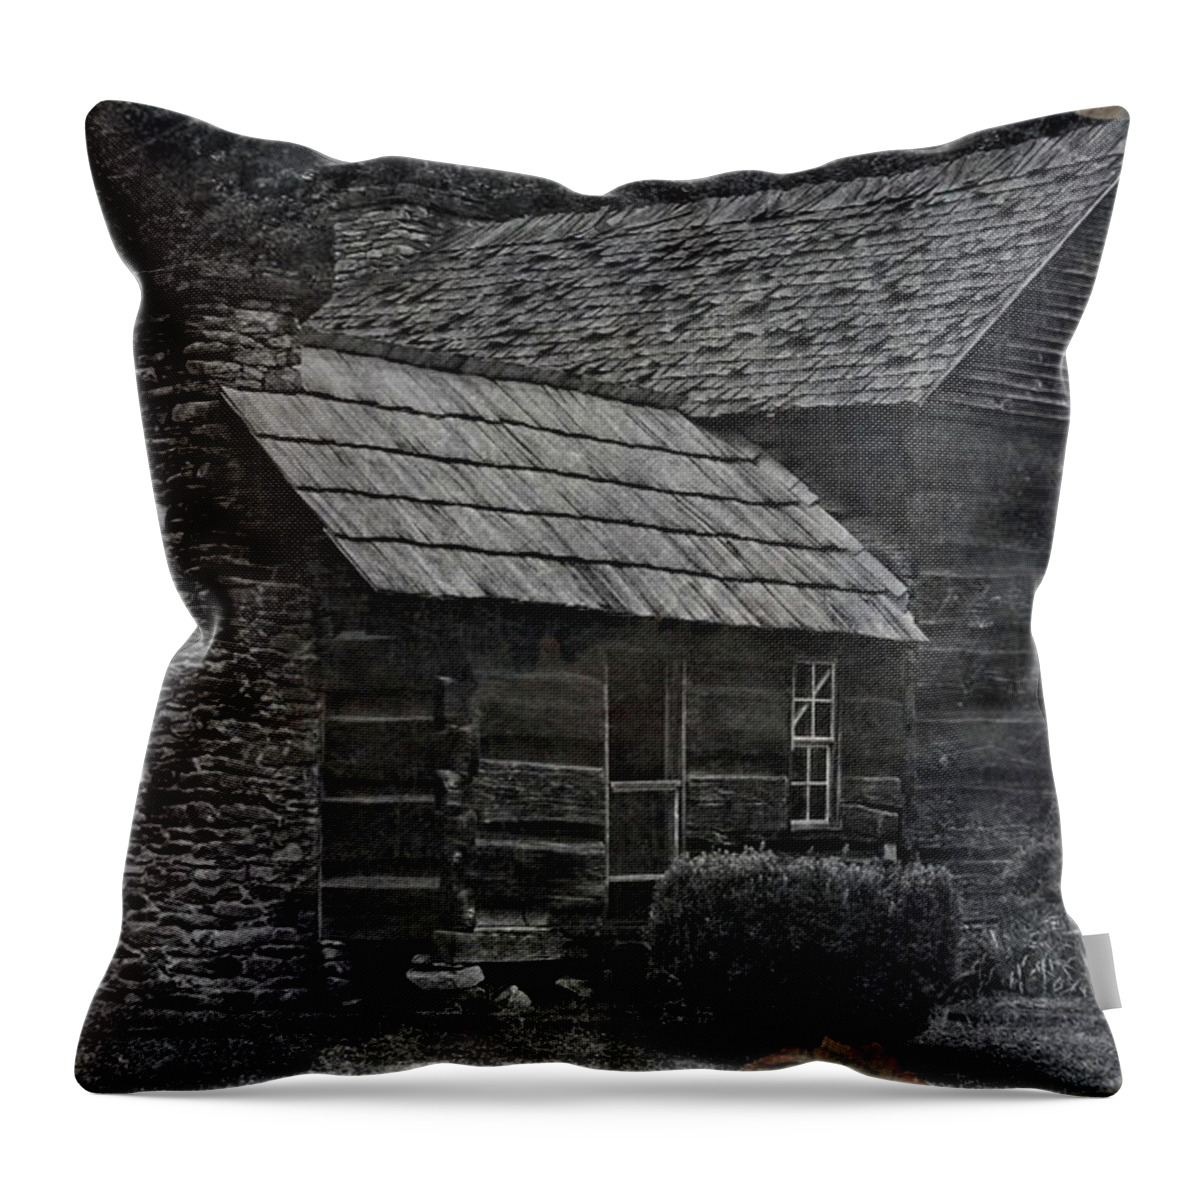 Cherokee Throw Pillow featuring the photograph Old Homestead by Cathy Harper